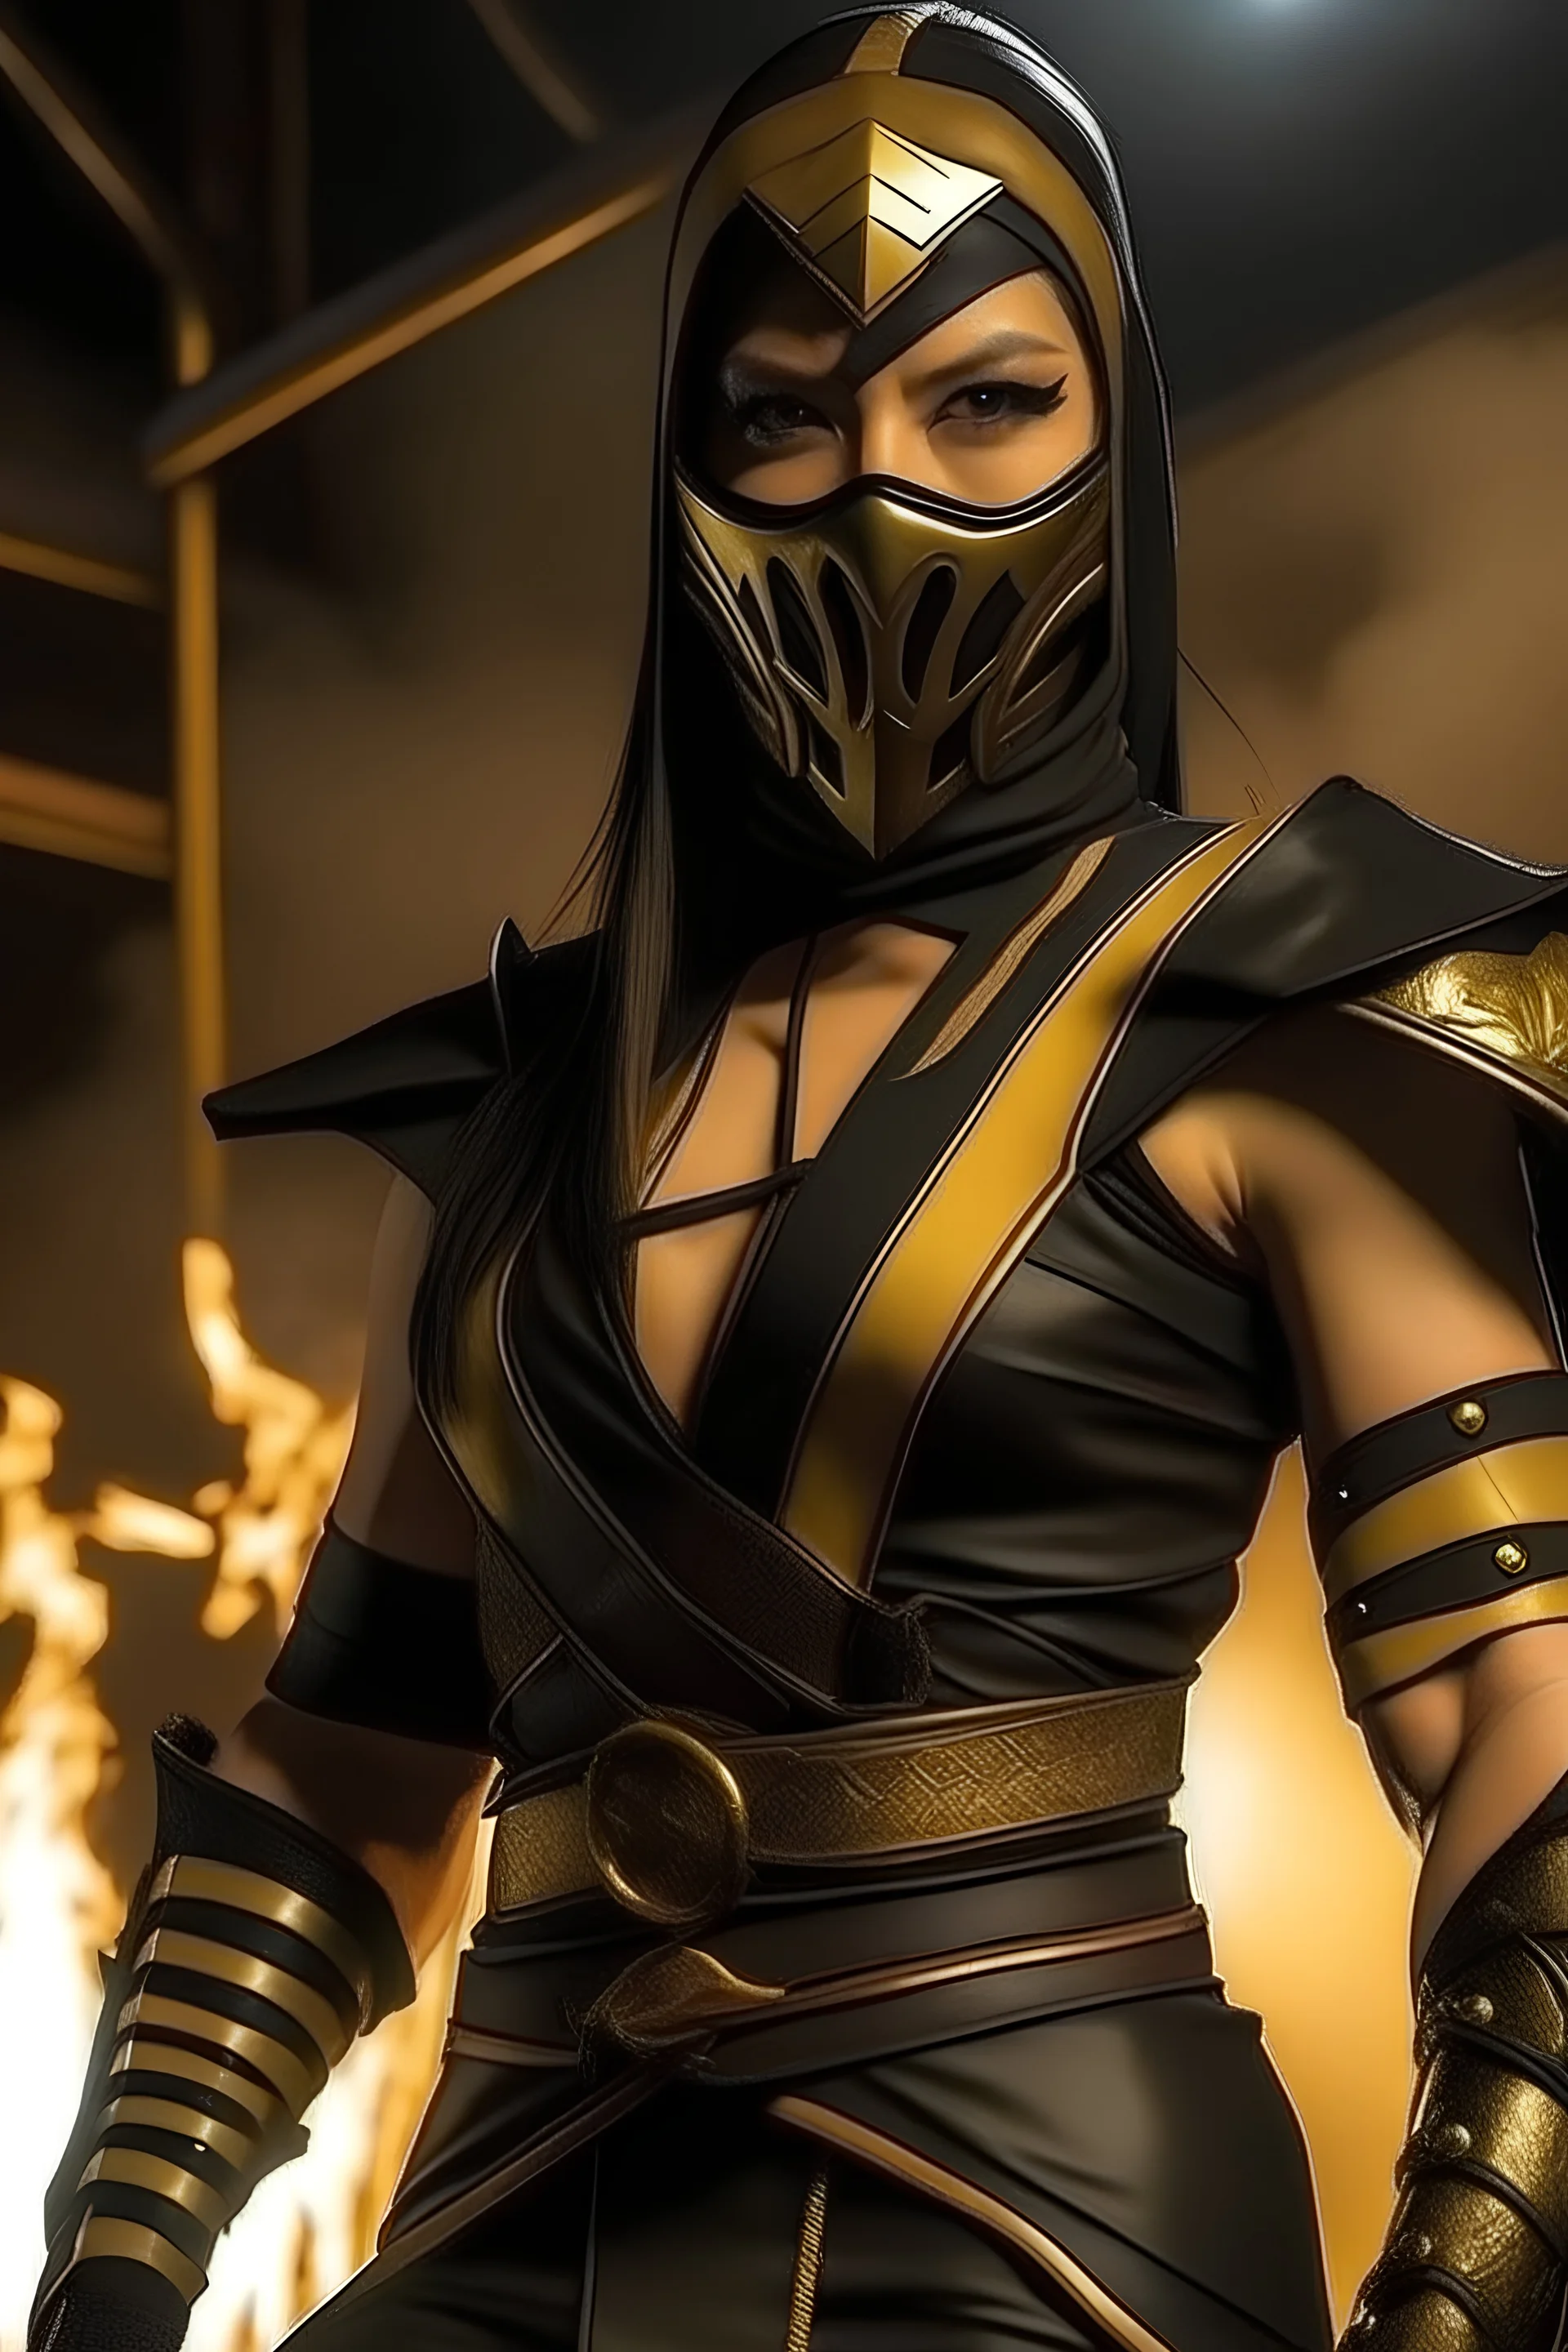 Mortal Kombat character, Asian girl with black and light gold ninja outfit, with ponytail, she has a fan as weapon, with long high heel boots and stood next to Smoke(Tomas Vrbada), she wear a gold and black mask